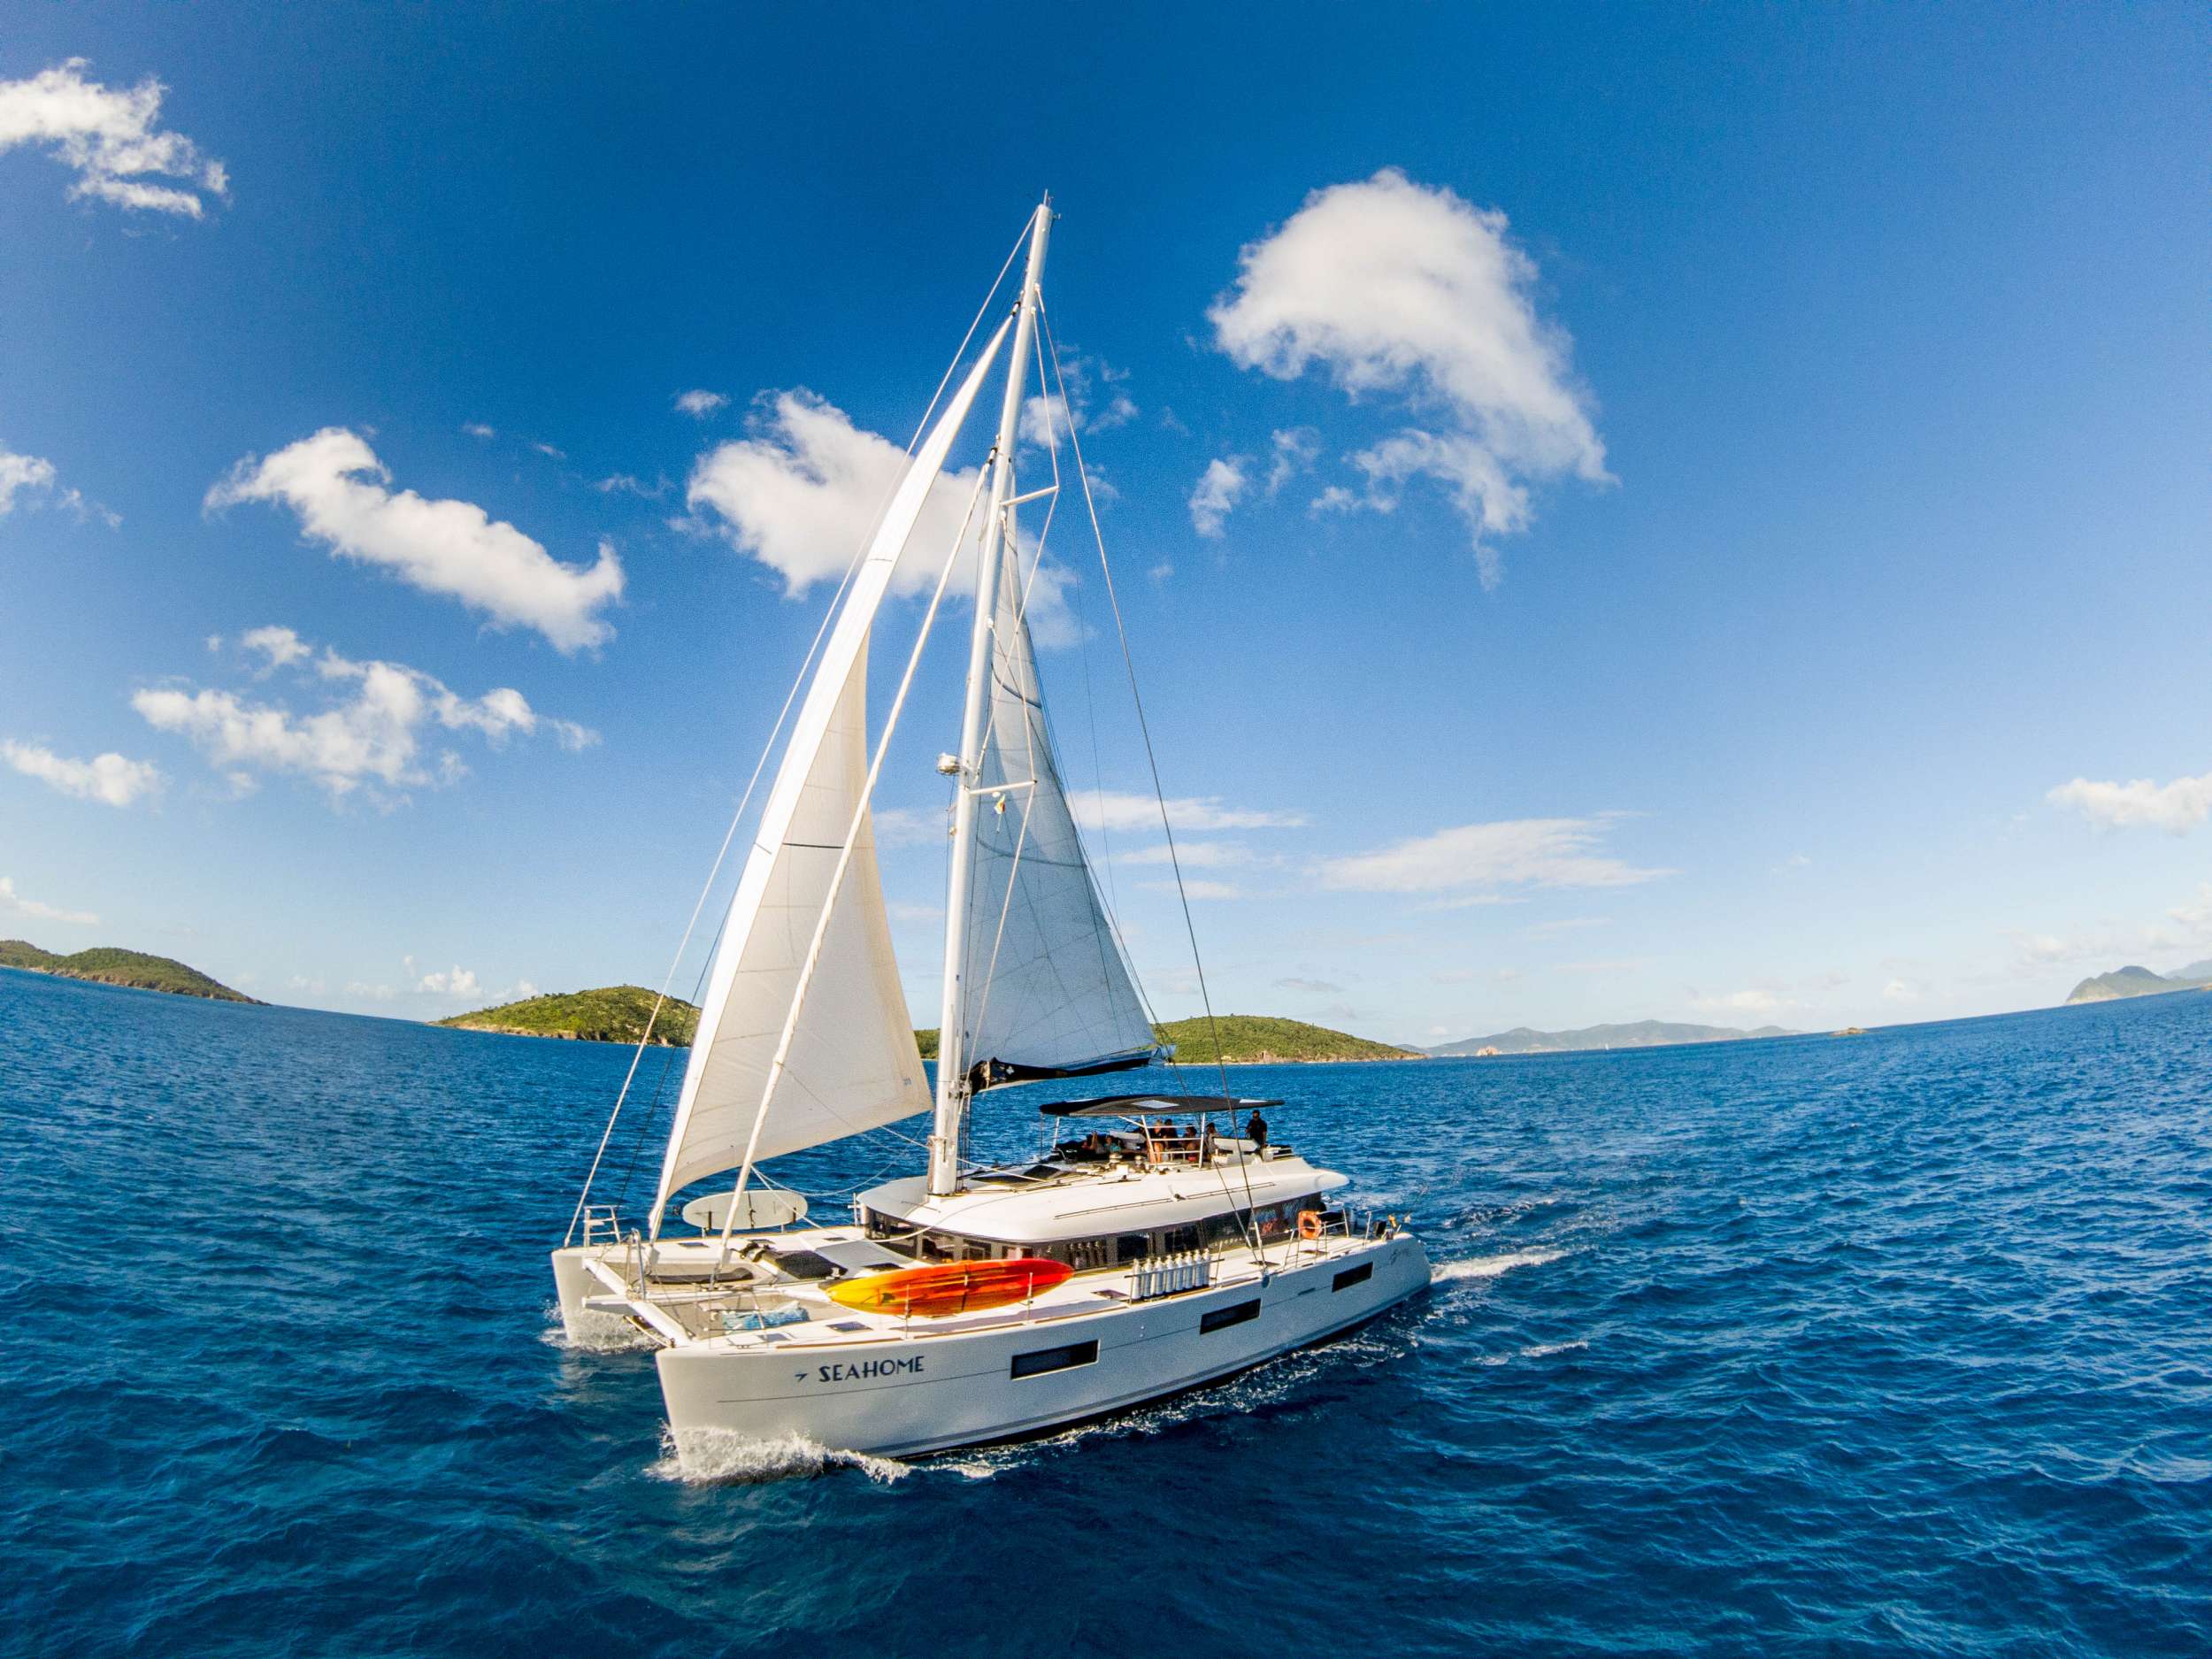 seahome - Yacht Charter East End Bay & Boat hire in Caribbean 1